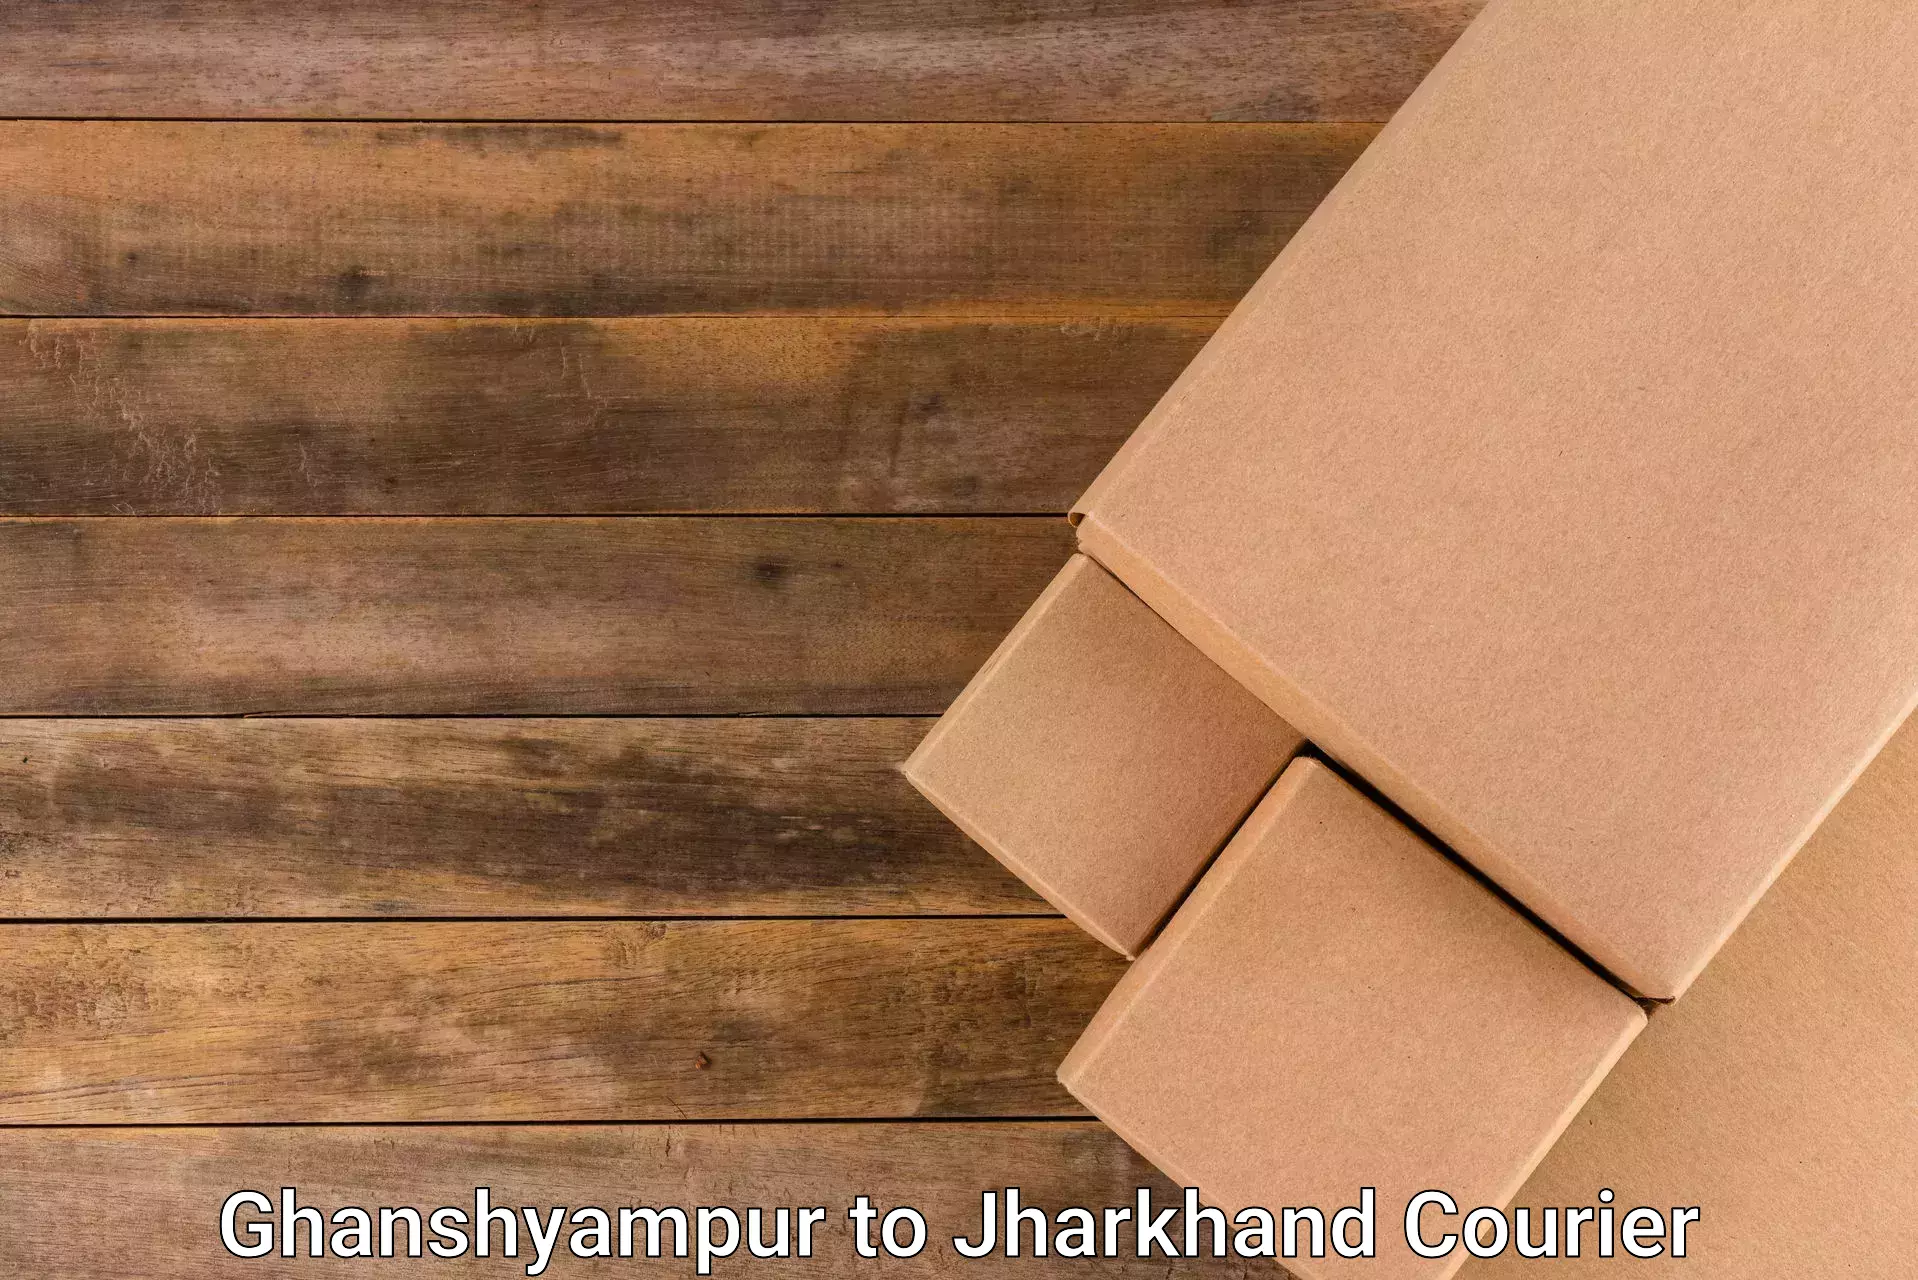 Efficient parcel delivery Ghanshyampur to Dhanbad